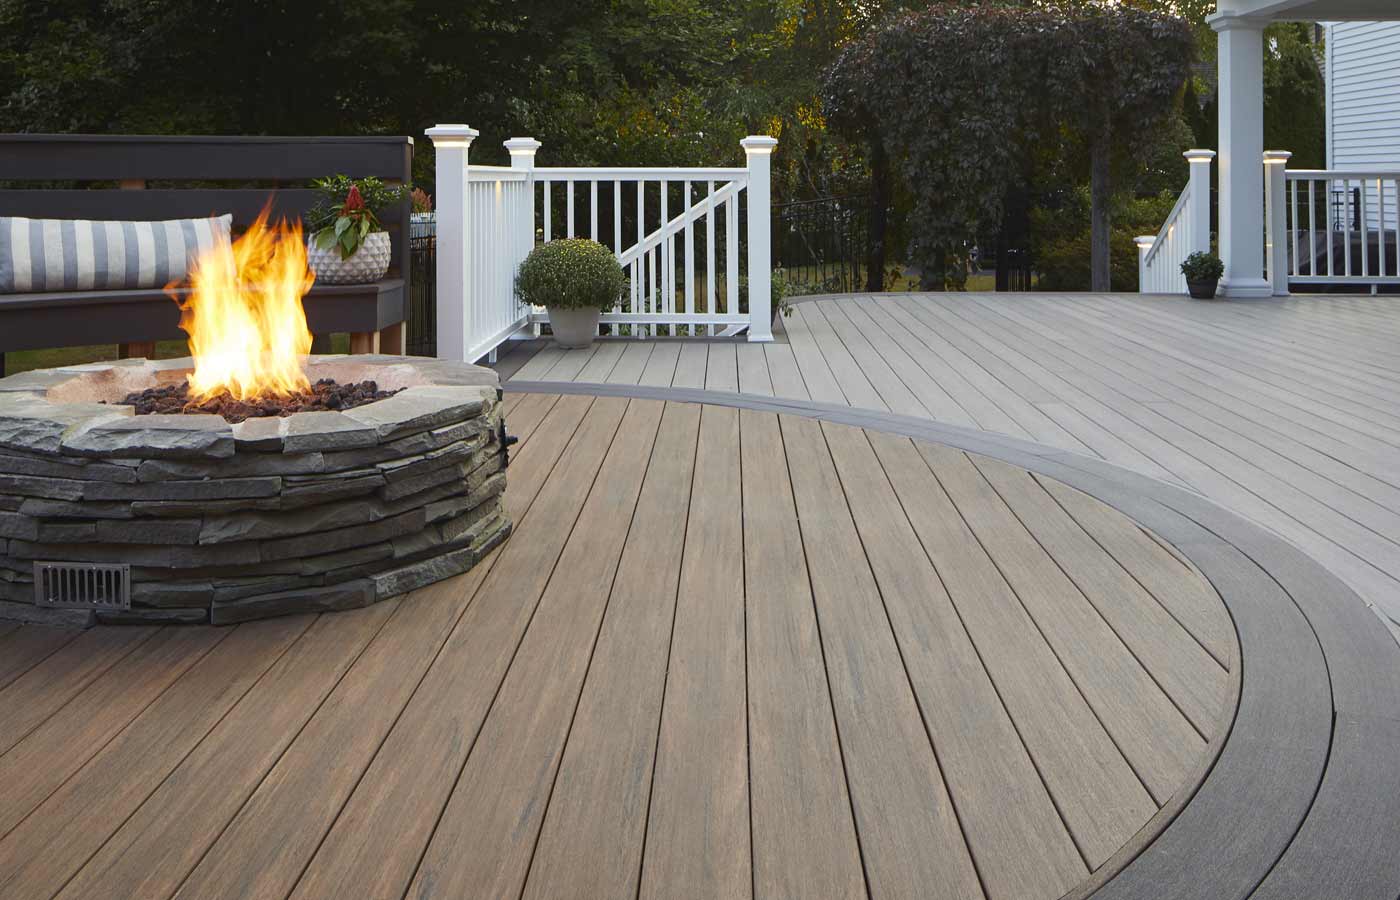 TimberTech Decking with fireplace